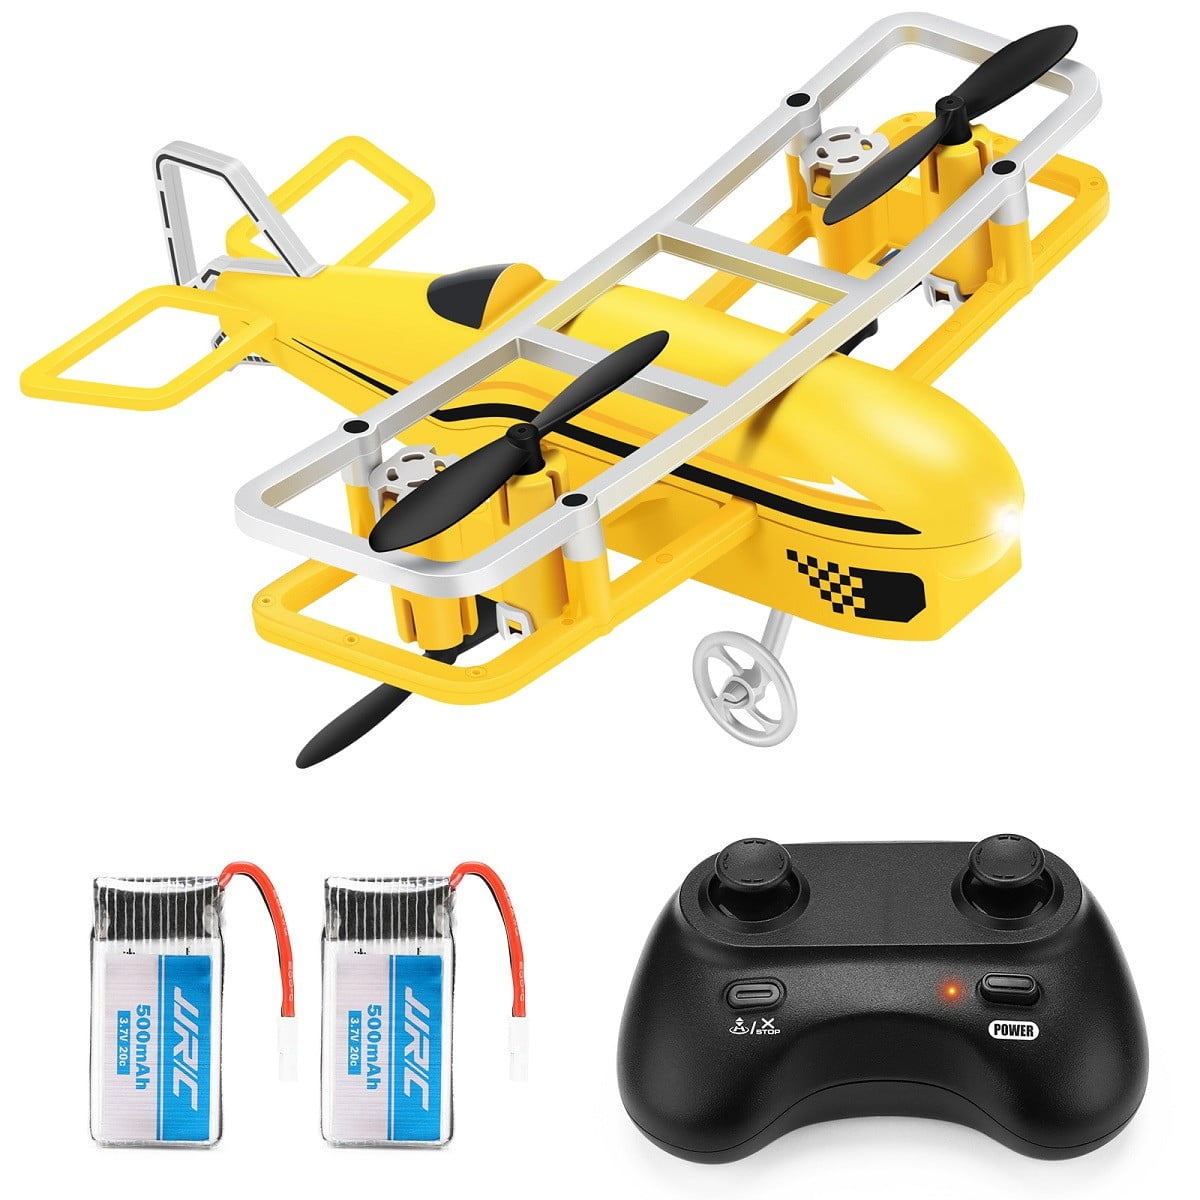 Snor Trin mode JJRC Mini Drone Quadcopter with Altitude Hold 360° Flip and Speed  Adjustment RC Airplane Helicopter Toy for Kids Adults - Walmart.com